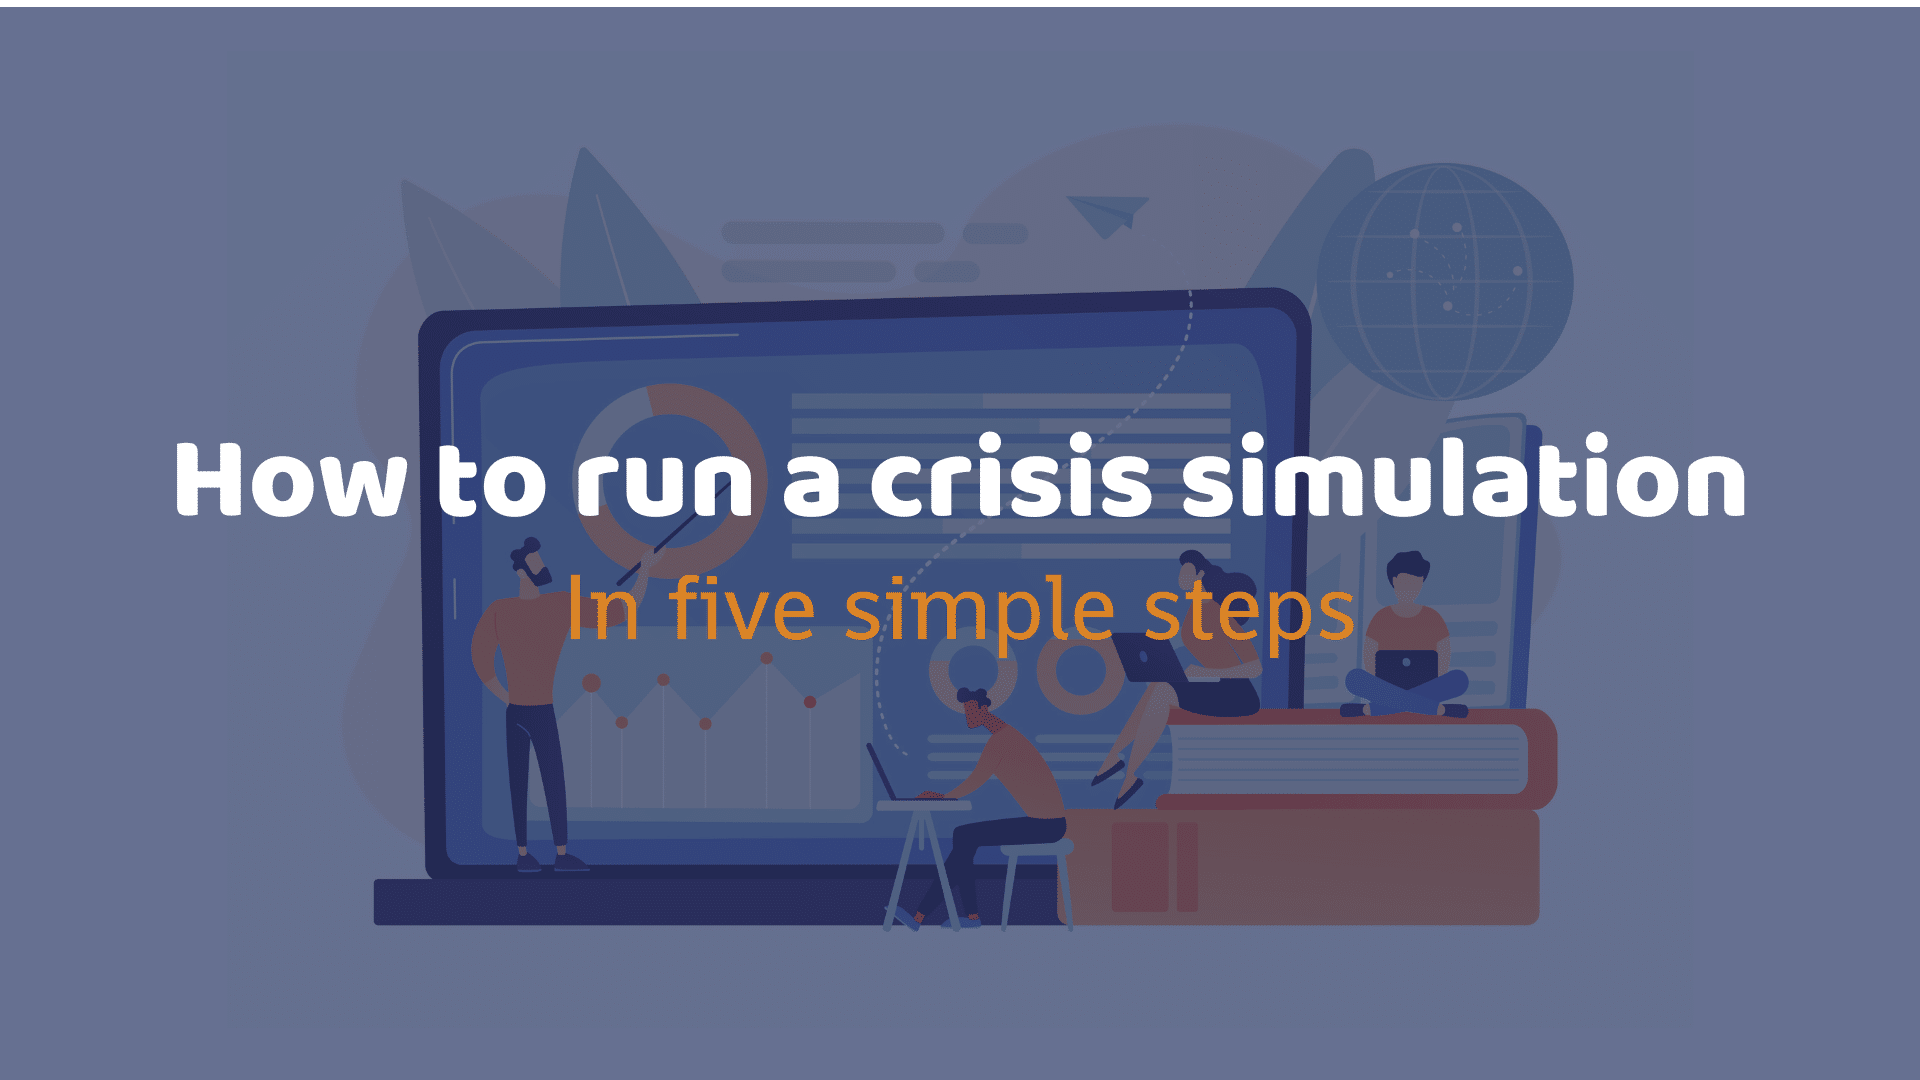 How to run a crisis simulation in five simple steps